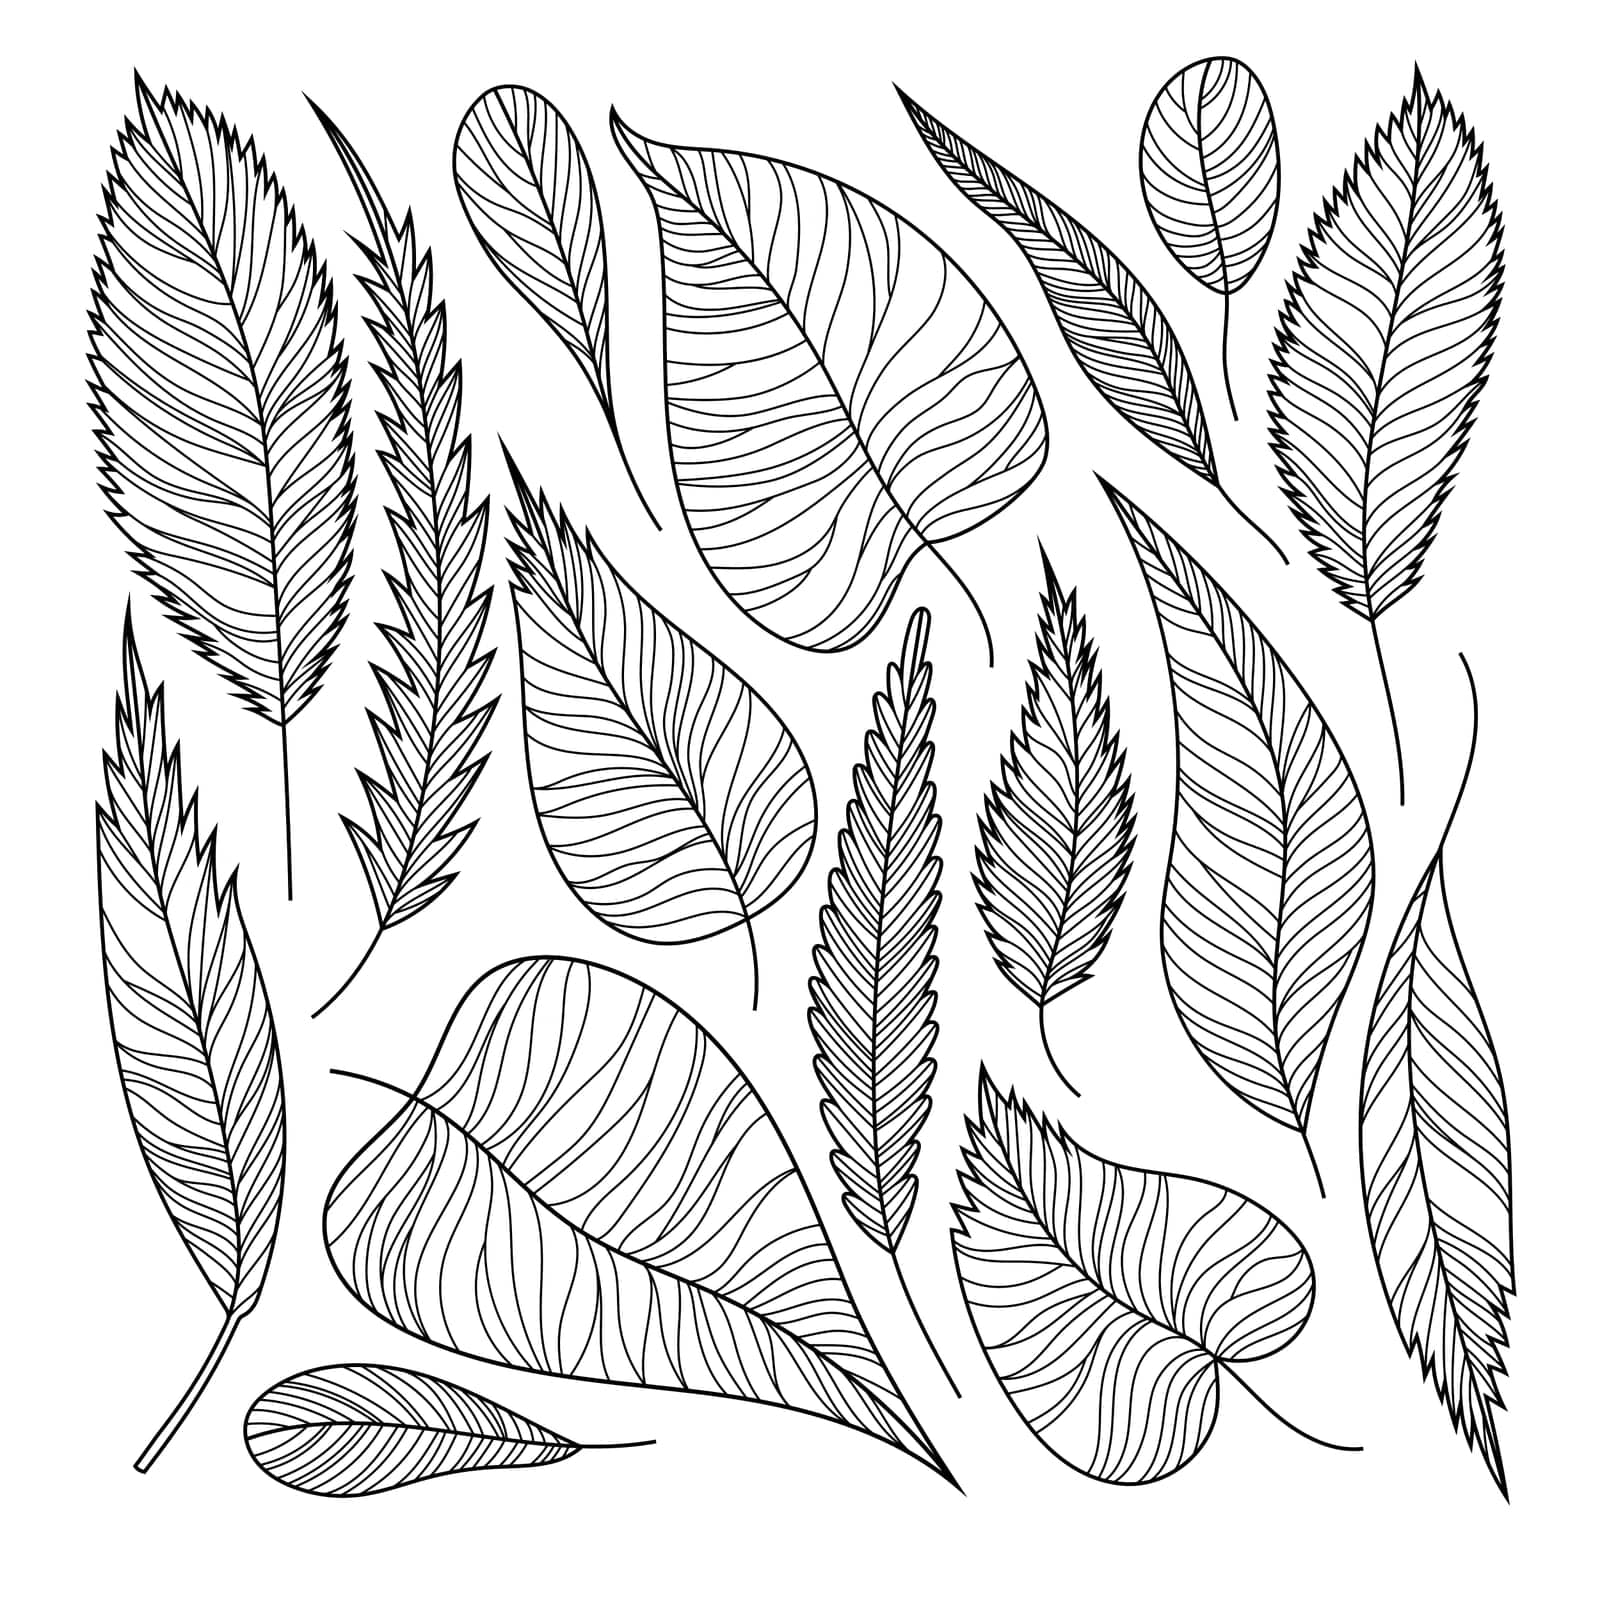 Black leaves line work. Isolated on white background. Hand drawn line vector illustration. Botanical collection.